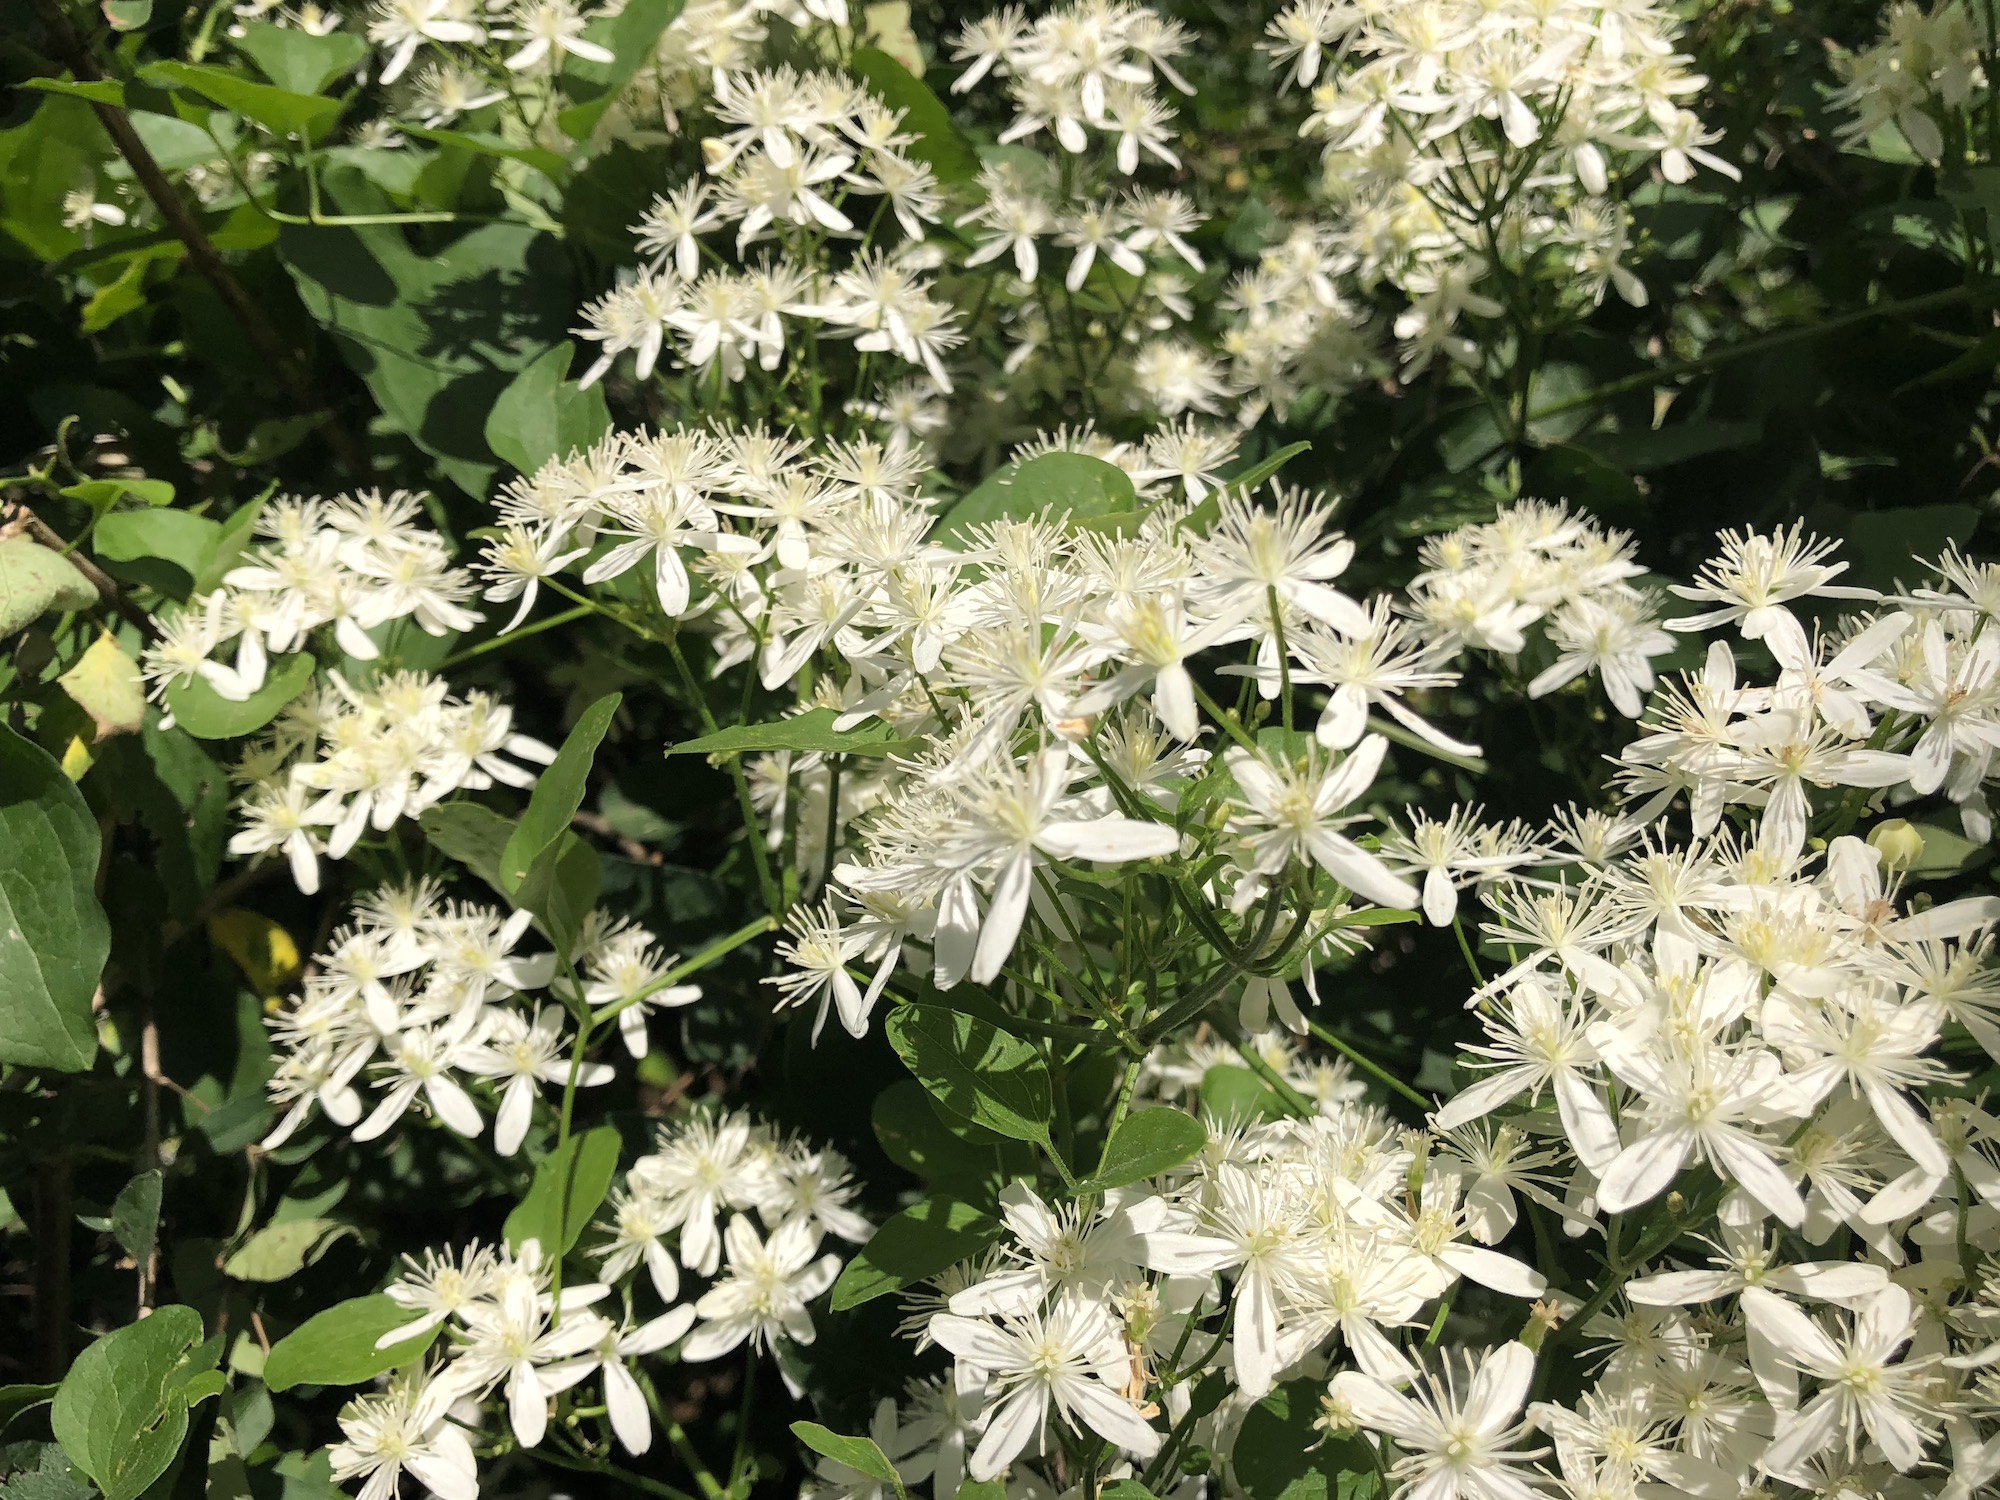 Sweet Autumn Clematis along bike path behind Gregory Street in Madison, Wisconsin on September 12, 2018.